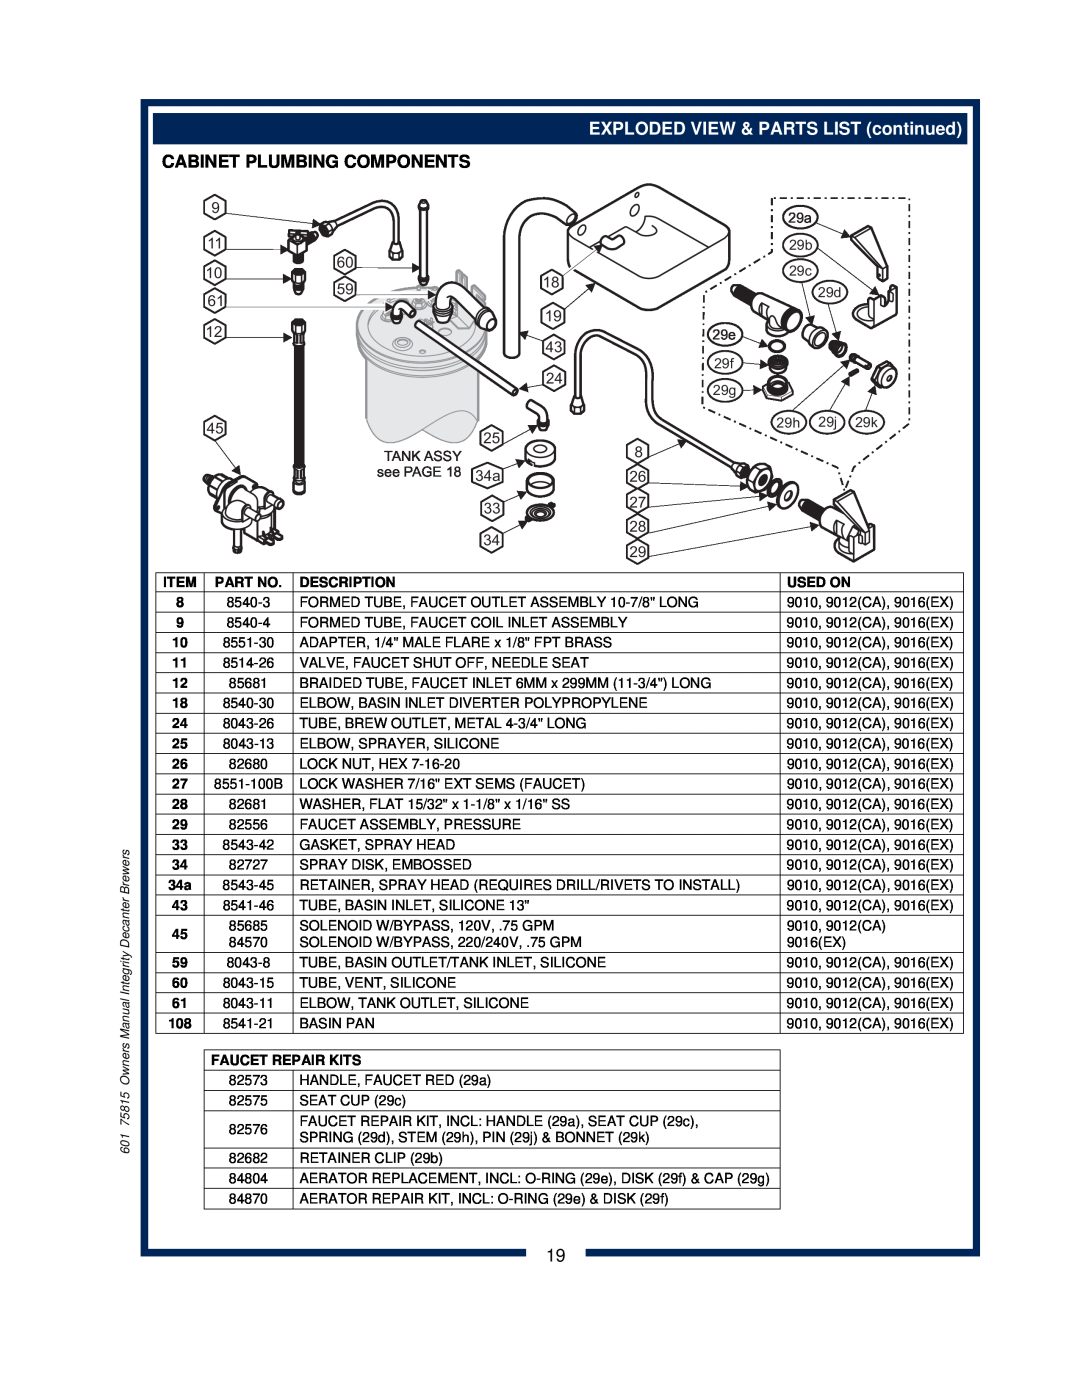 Bloomfield 9010, 9016, 9012 owner manual EXPLODED VIEW & PARTS LIST continued, Cabinet Plumbing Components 